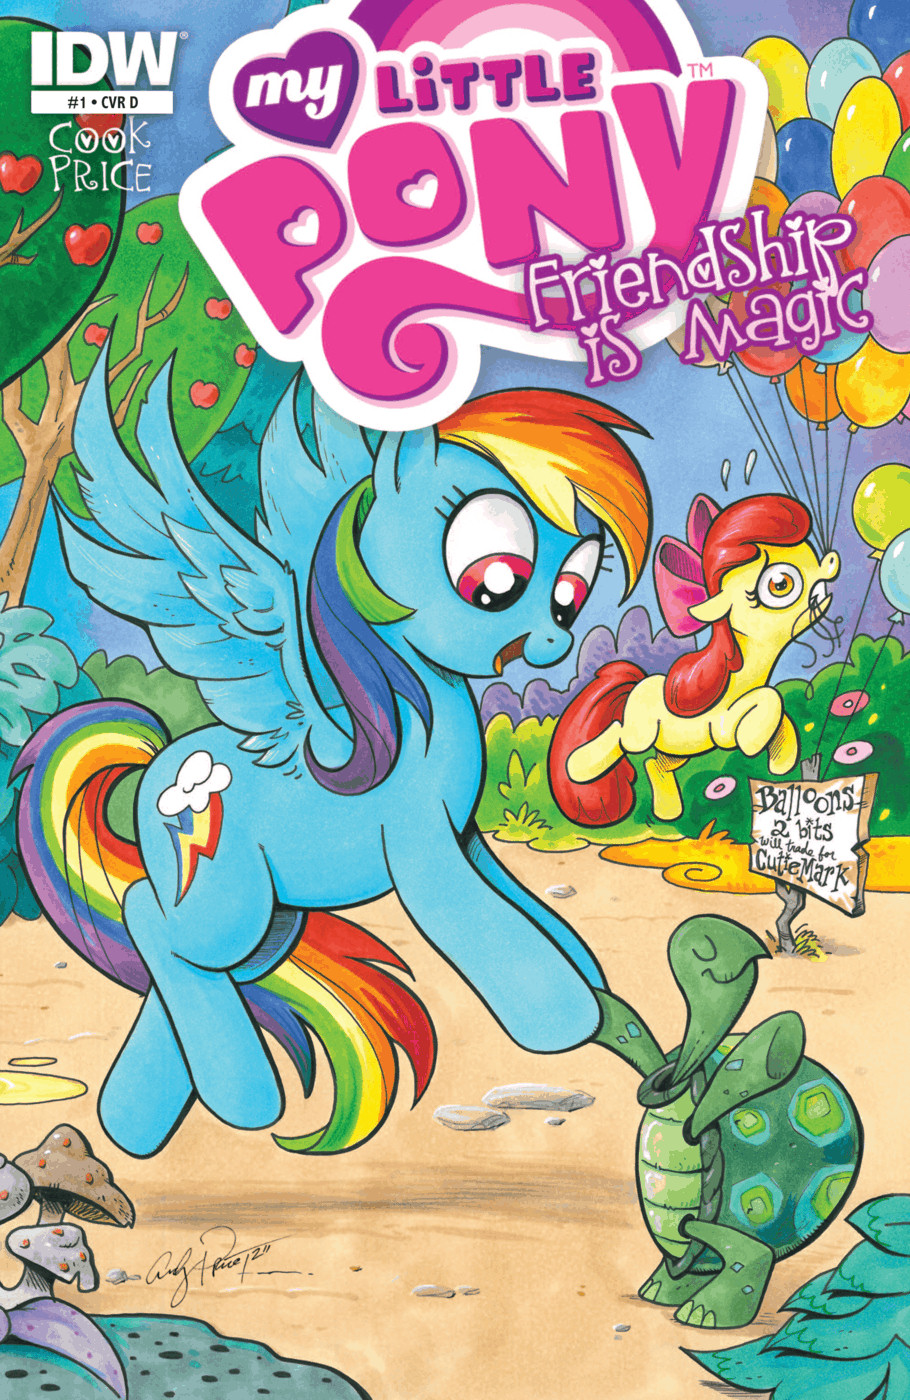 Read online My Little Pony: Friendship is Magic comic -  Issue #1 - 4